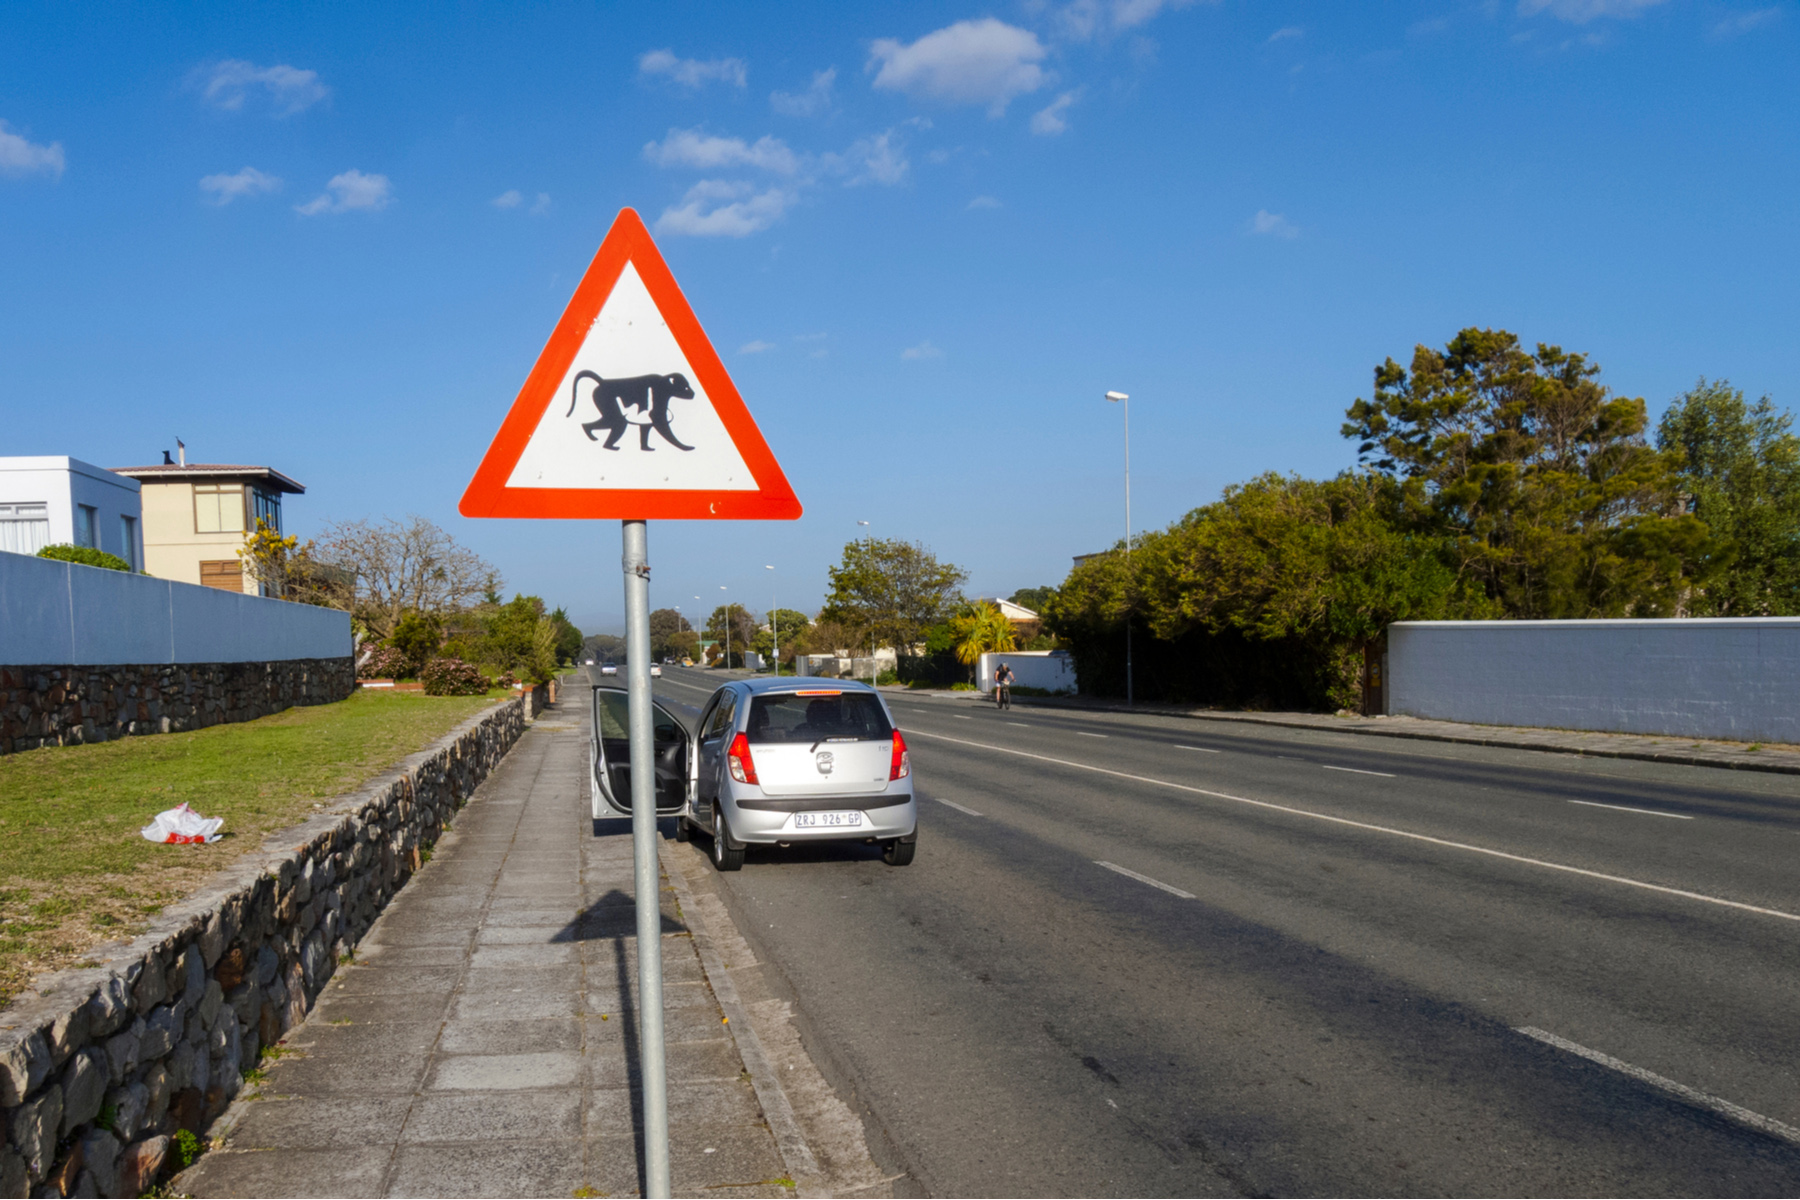 Road sign of baboon crossing road in Hermanus, South Africa